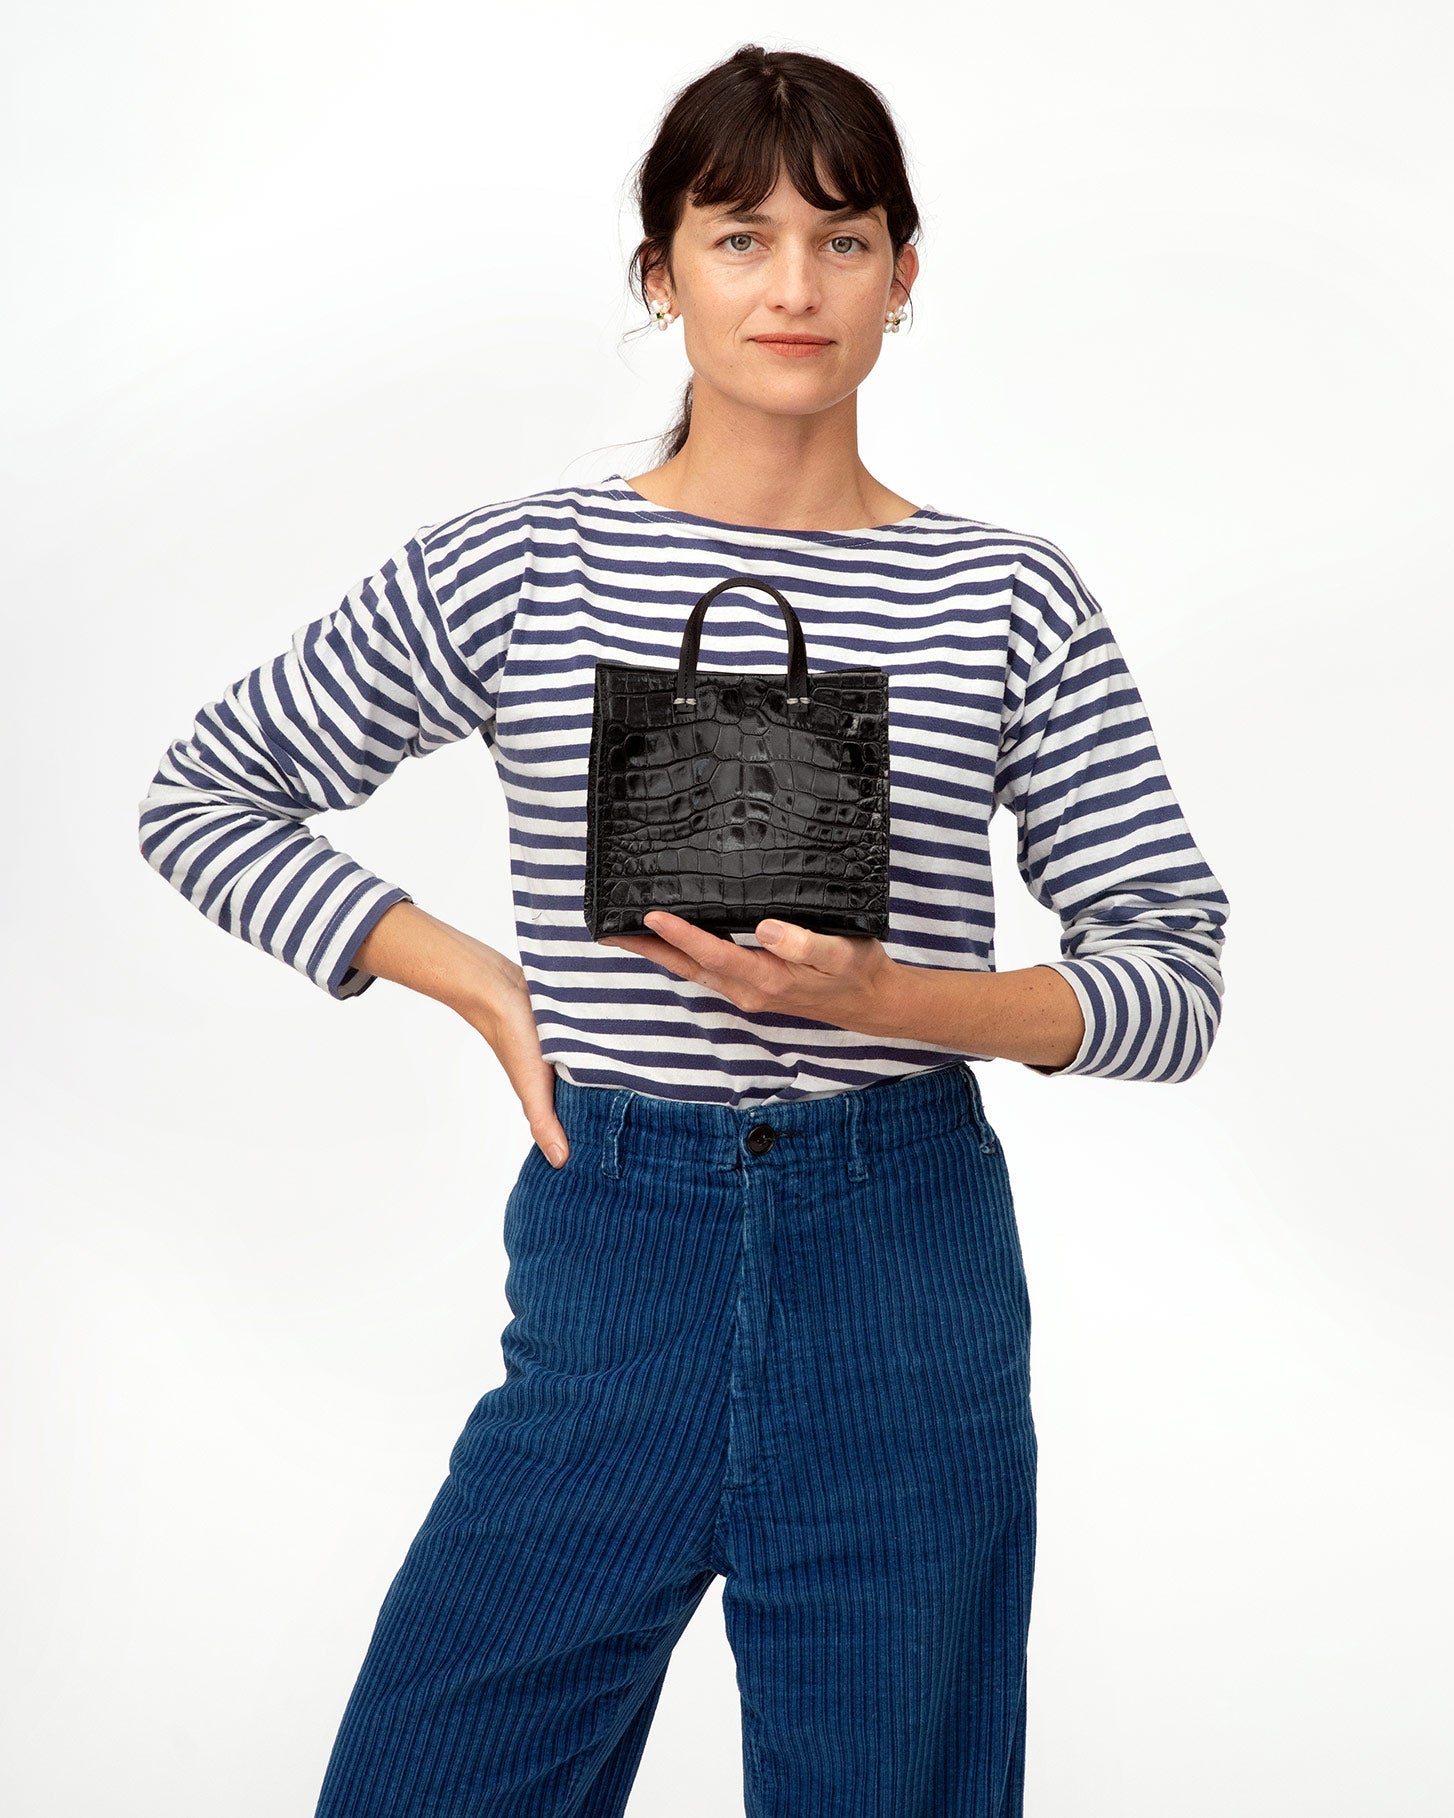 danica wearing a striped shirt and blue cords holding the Black croco Simple Tote Bébé in her right hand in front of her chest